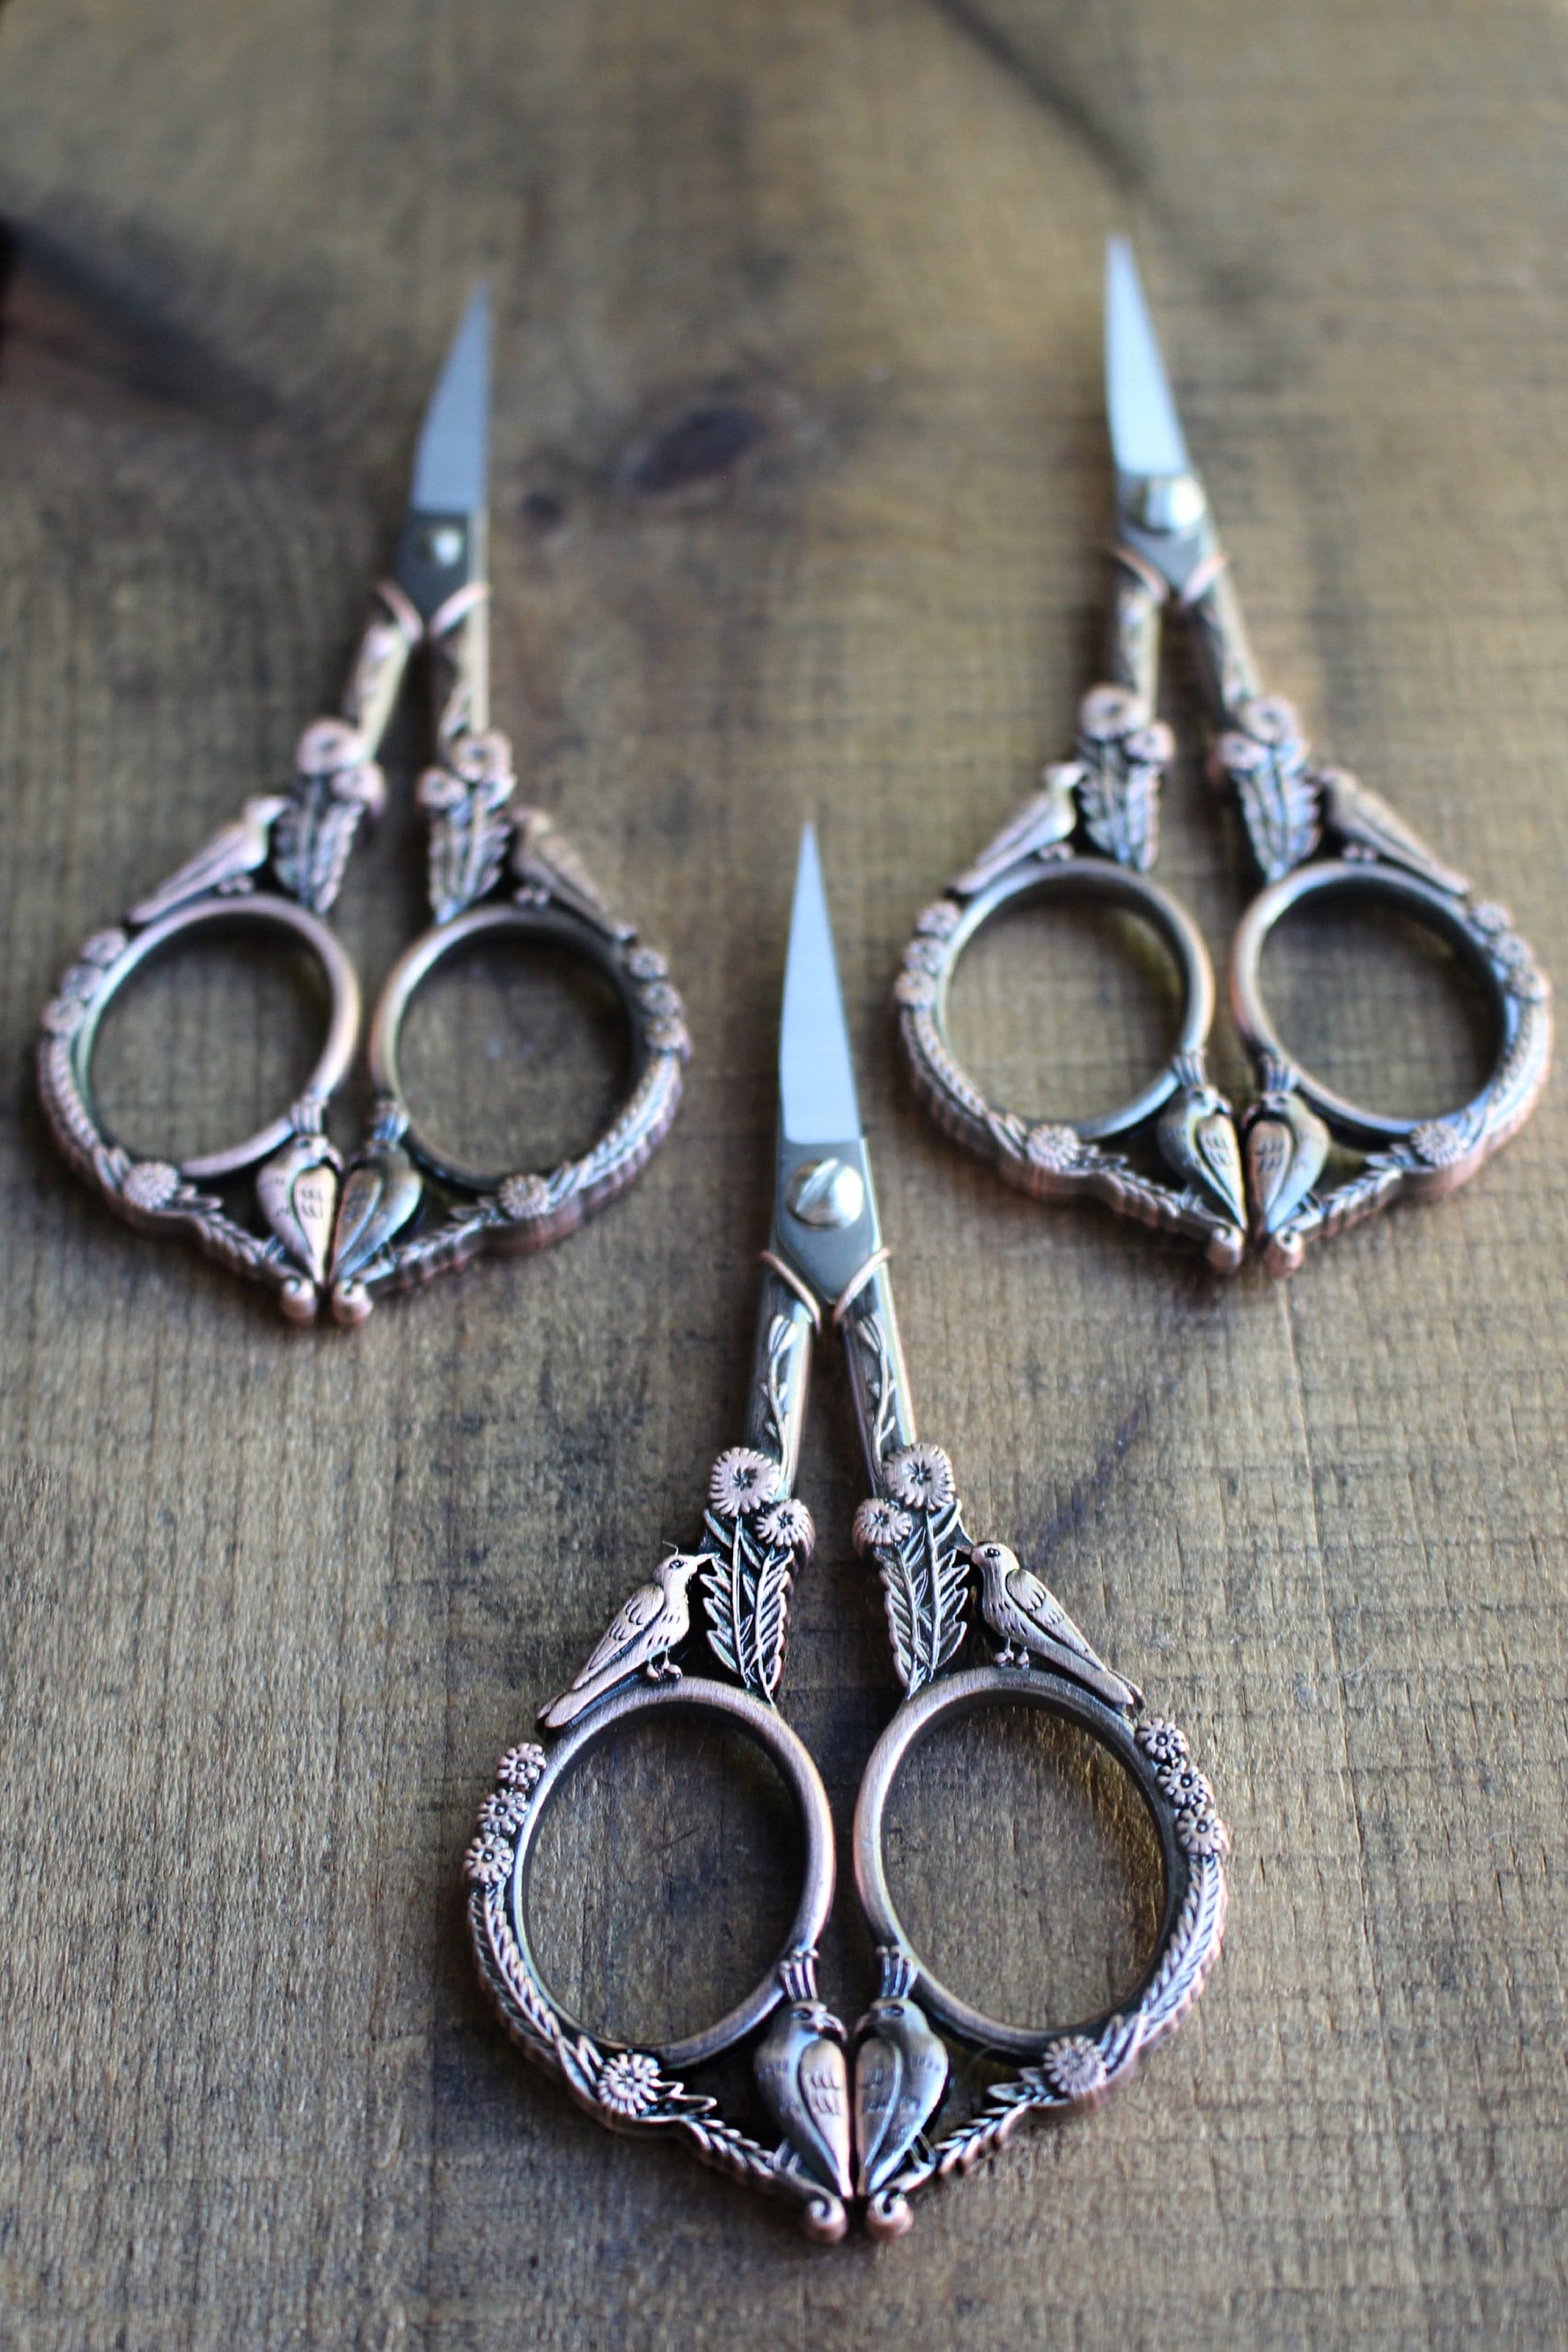 Feathered Friends Embroidery Scissors in antique copper